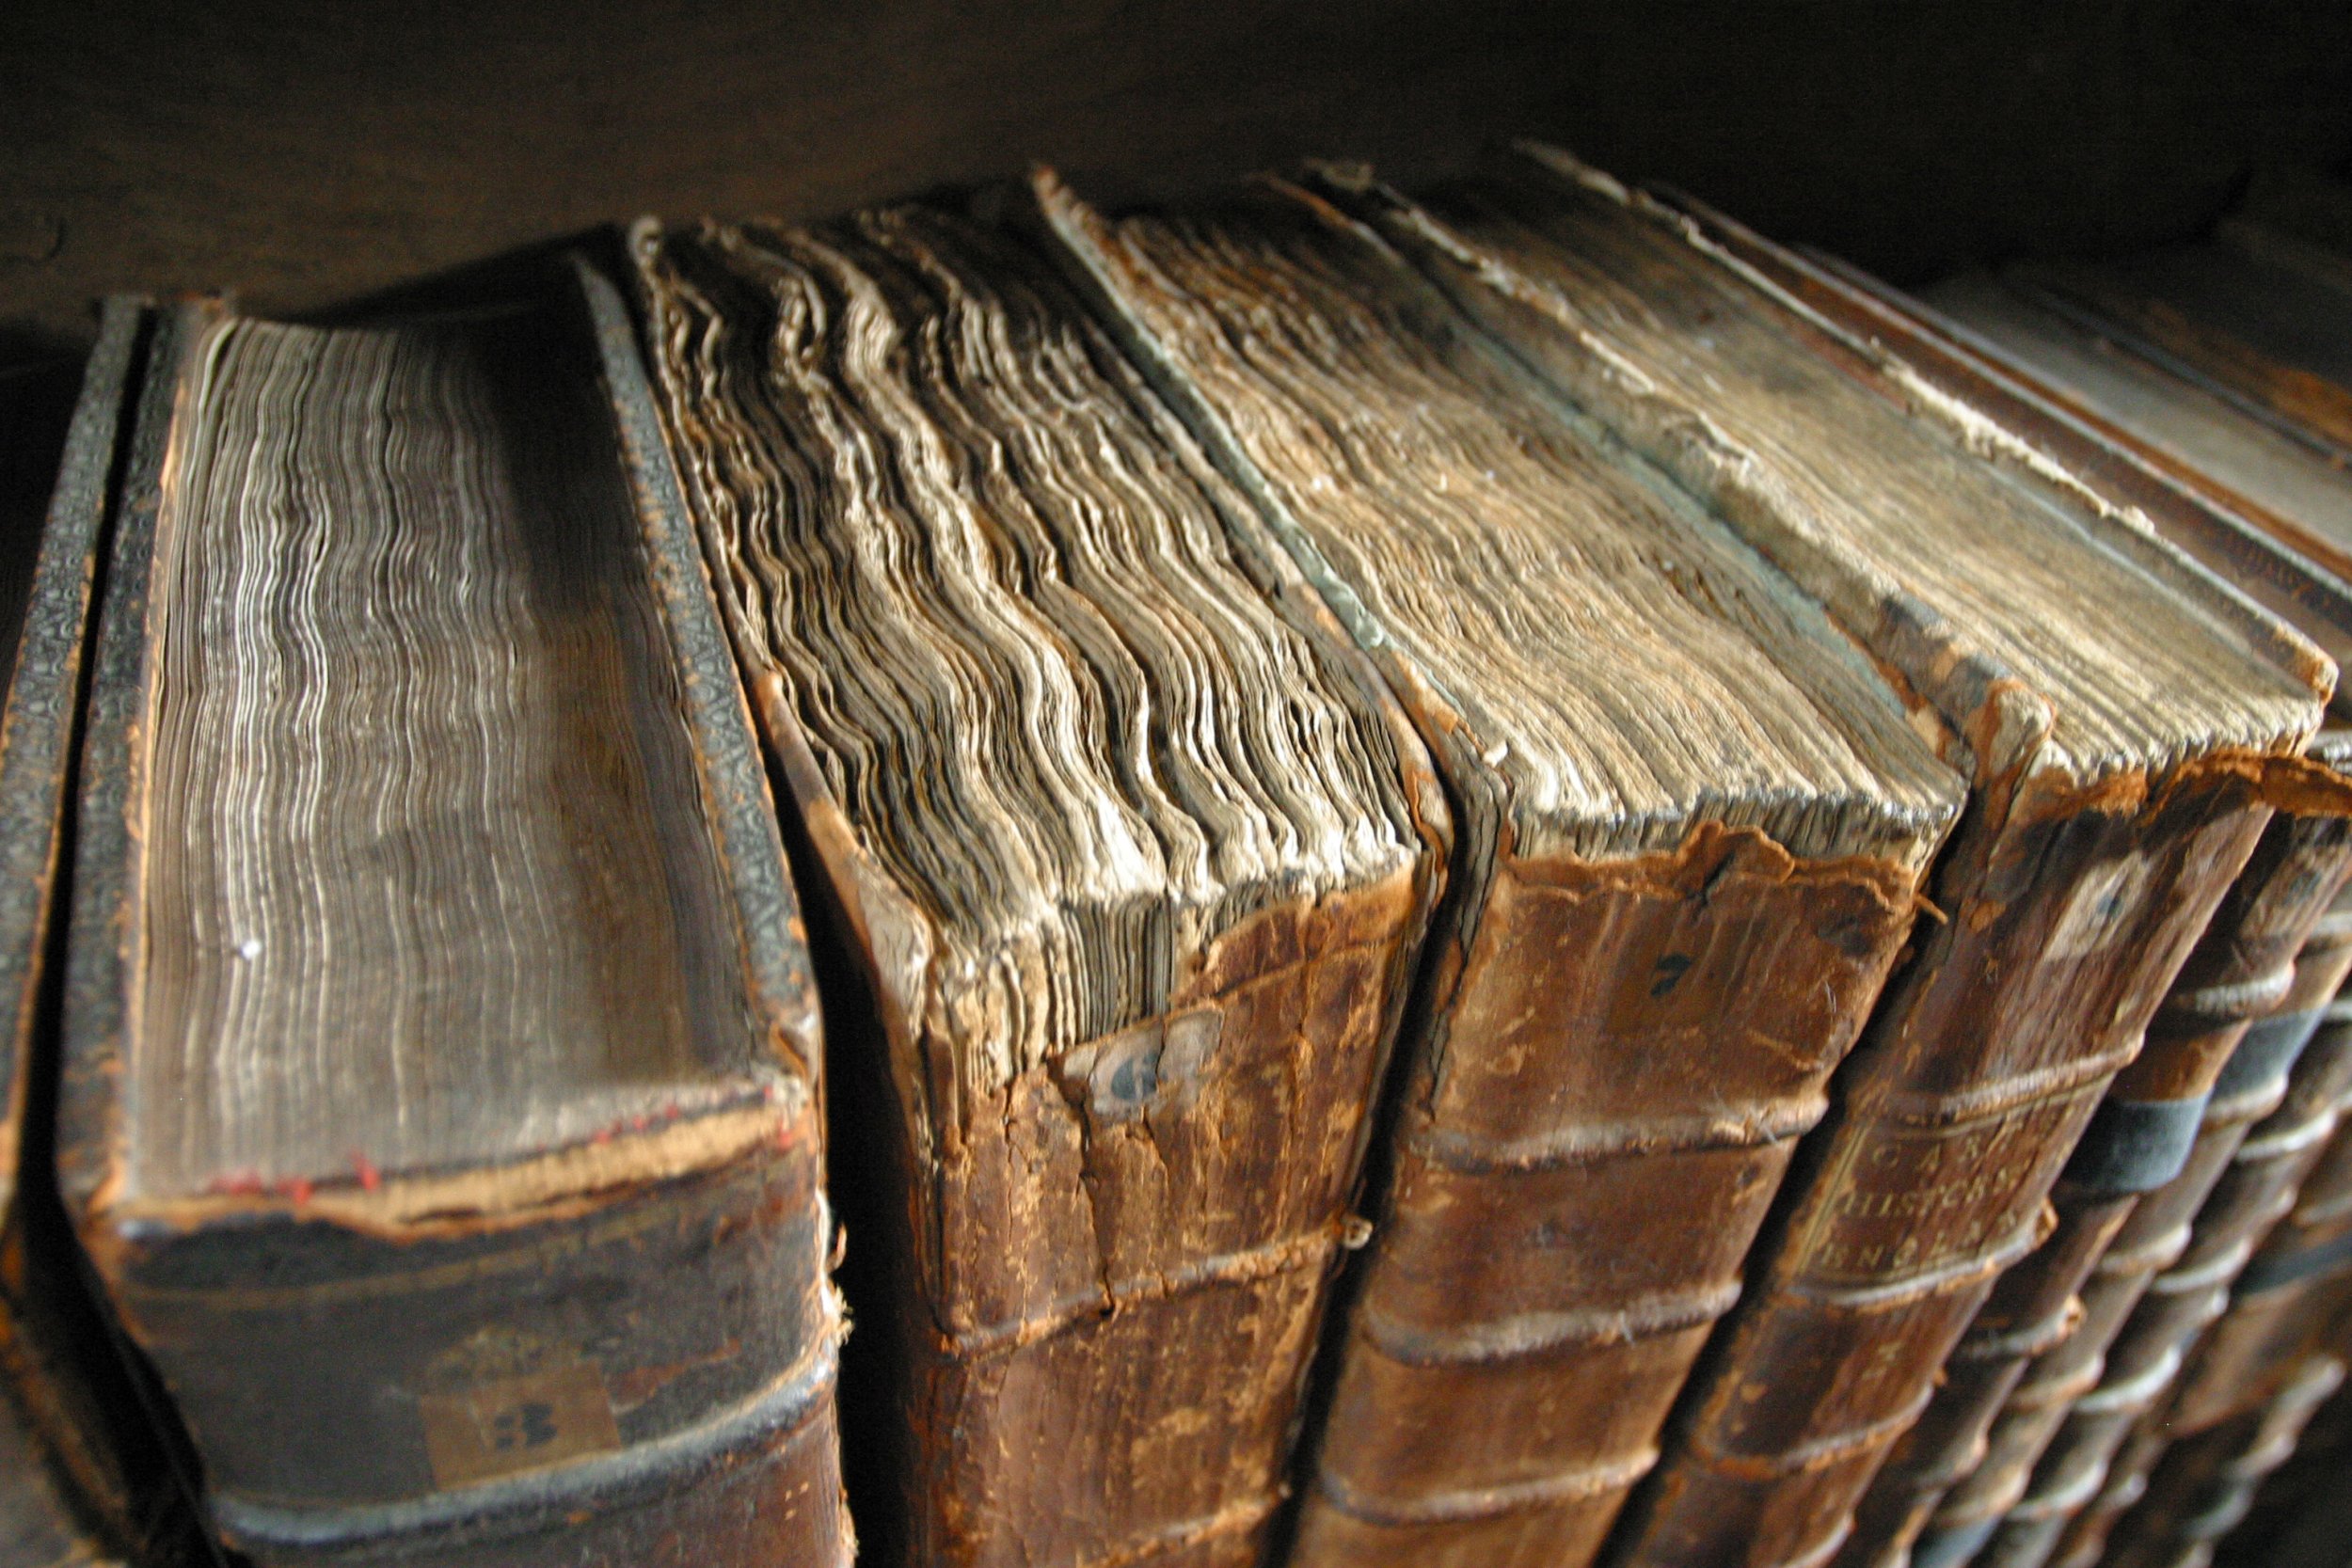 Books Bound In Human Skin Are Spooky Reminder Of ‘macabre Medieval 